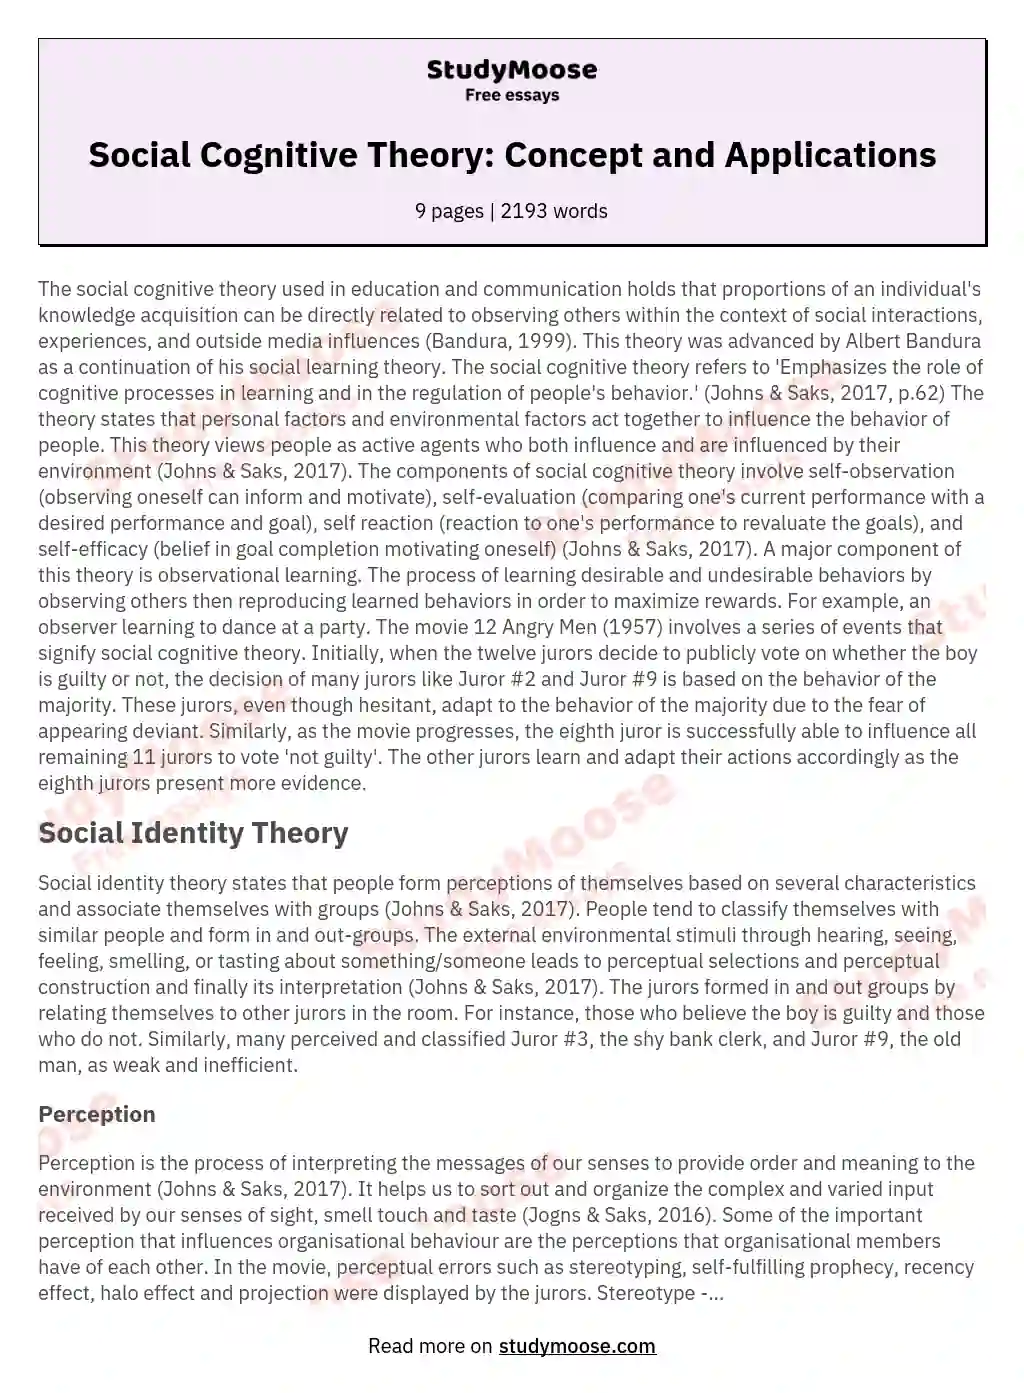 Social Cognitive Theory: Concept and Applications essay